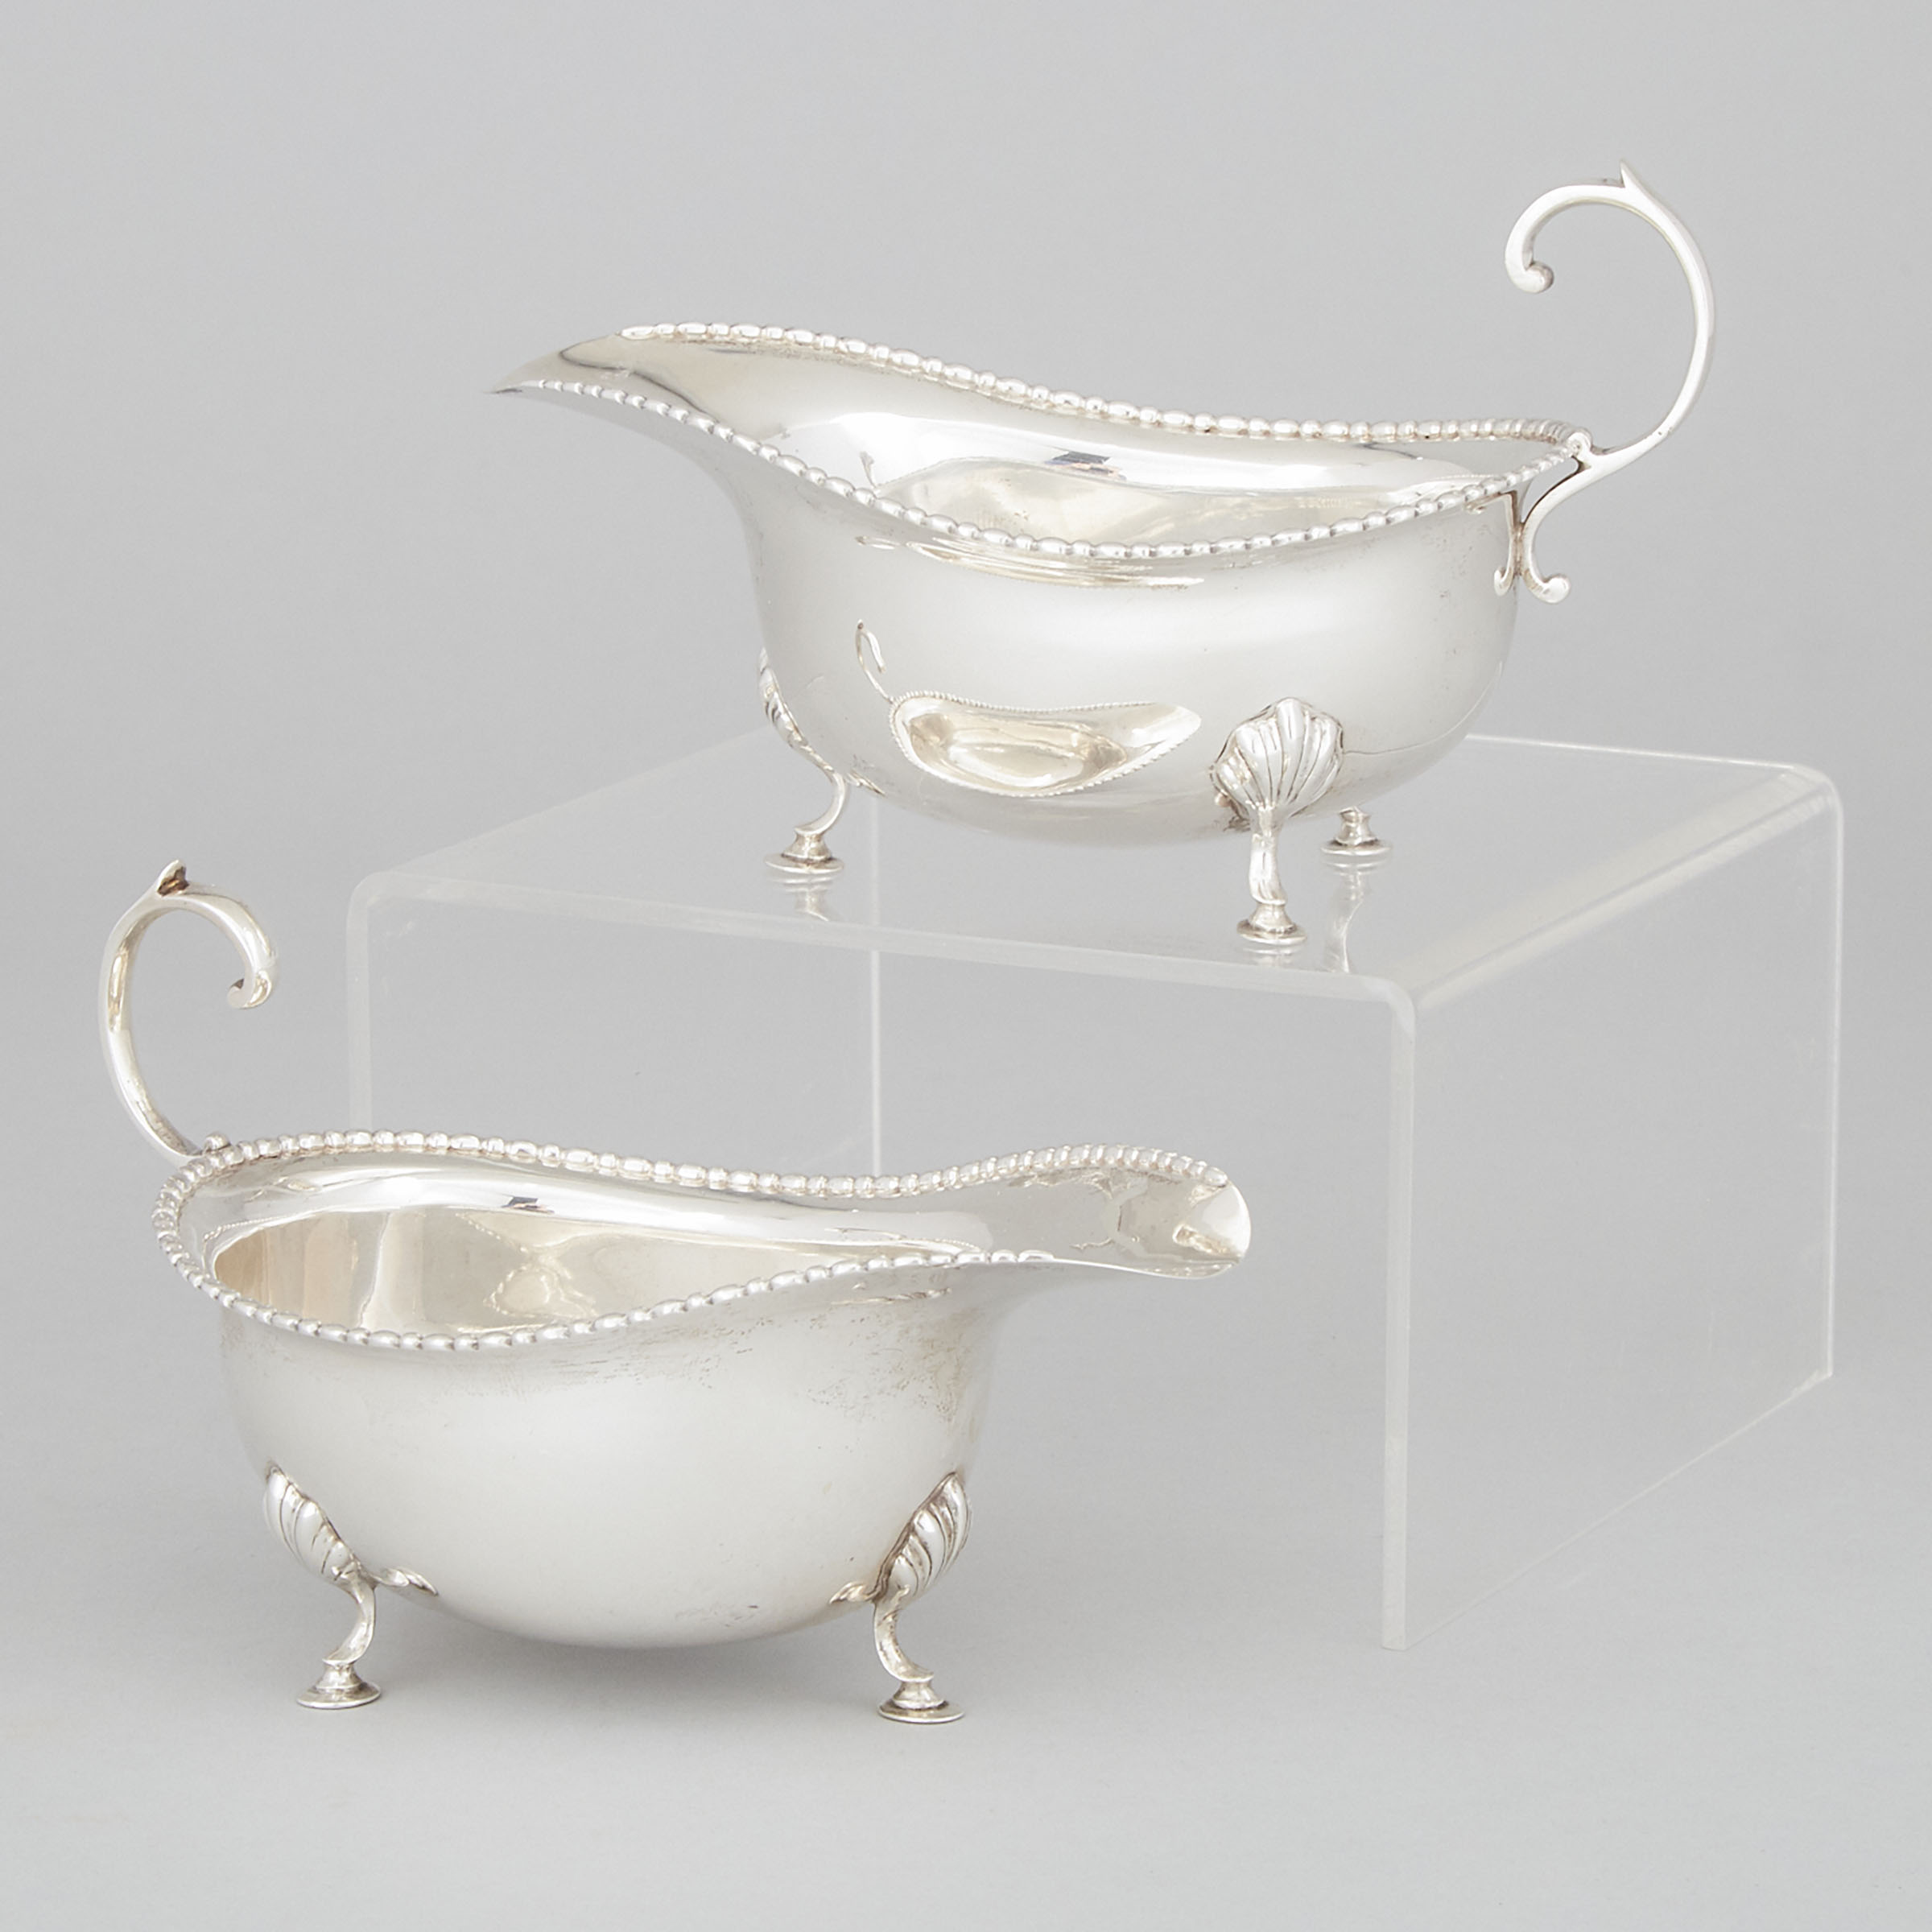 Pair of English Silver Sauce Boats, Horace Woodward & Co., Birmingham, 1919